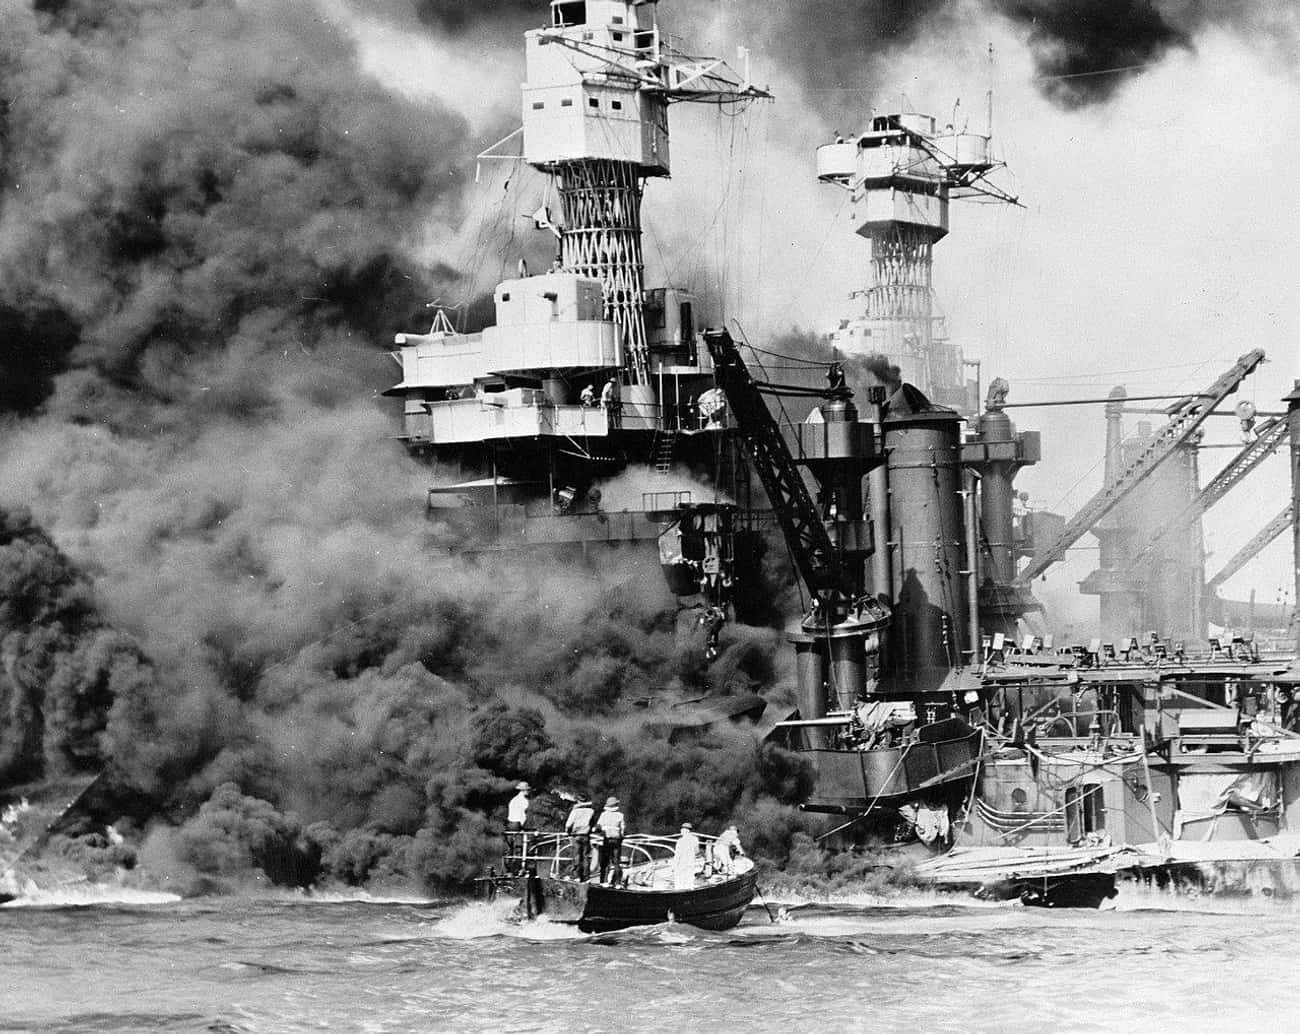 Three Sailors Survived At Pearl Harbor, Only To Perish 16 Days Later